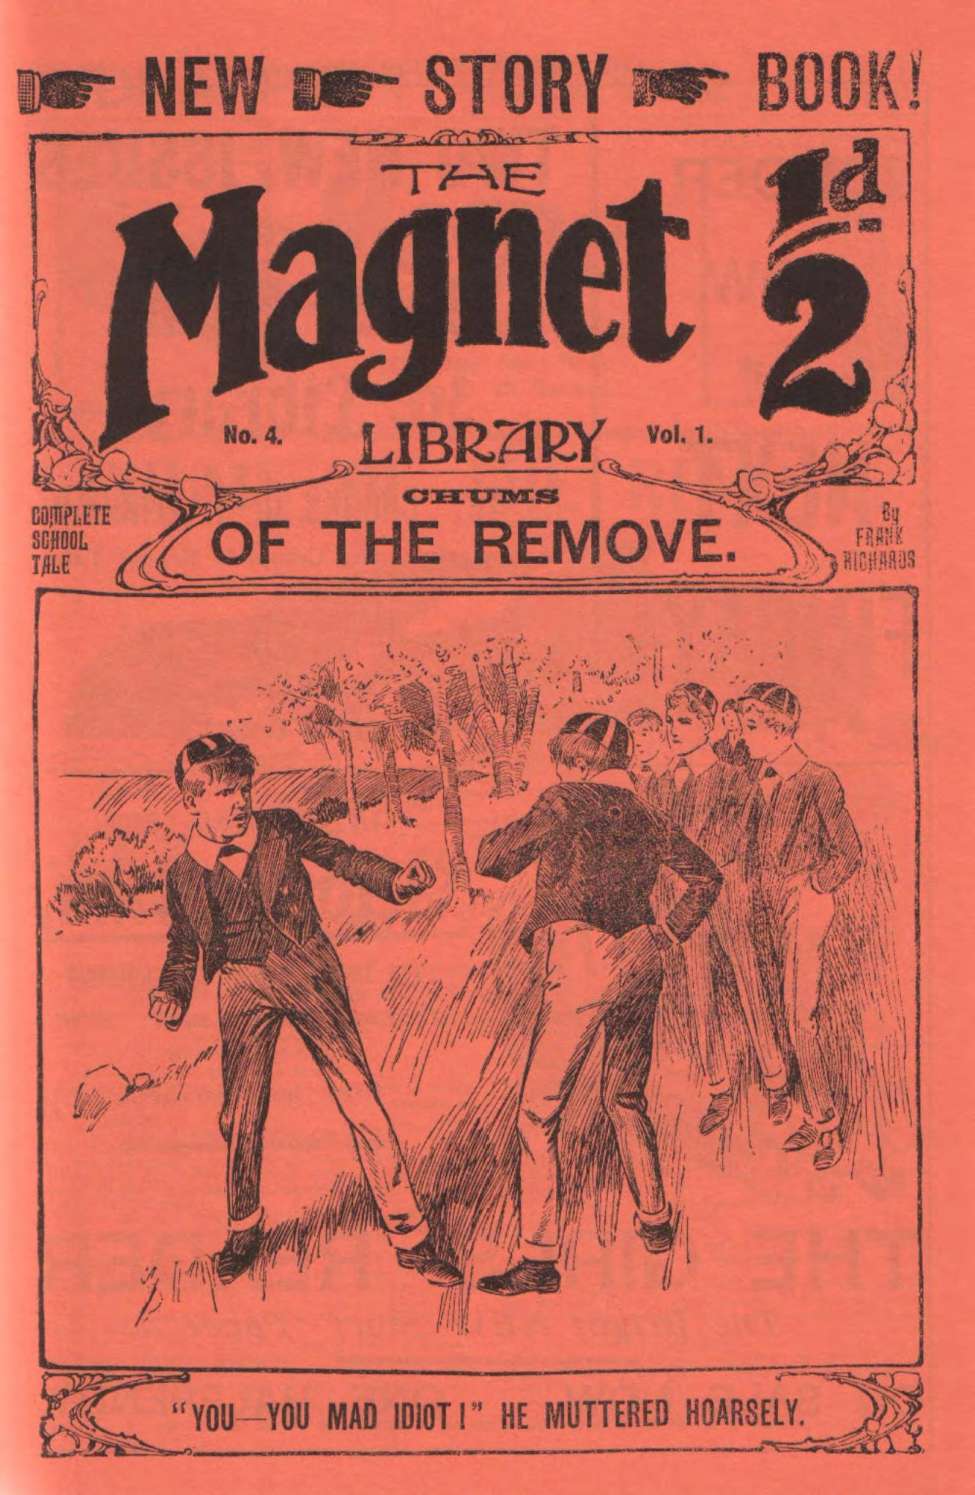 Comic Book Cover For The Magnet 4 - Chums of the Remove